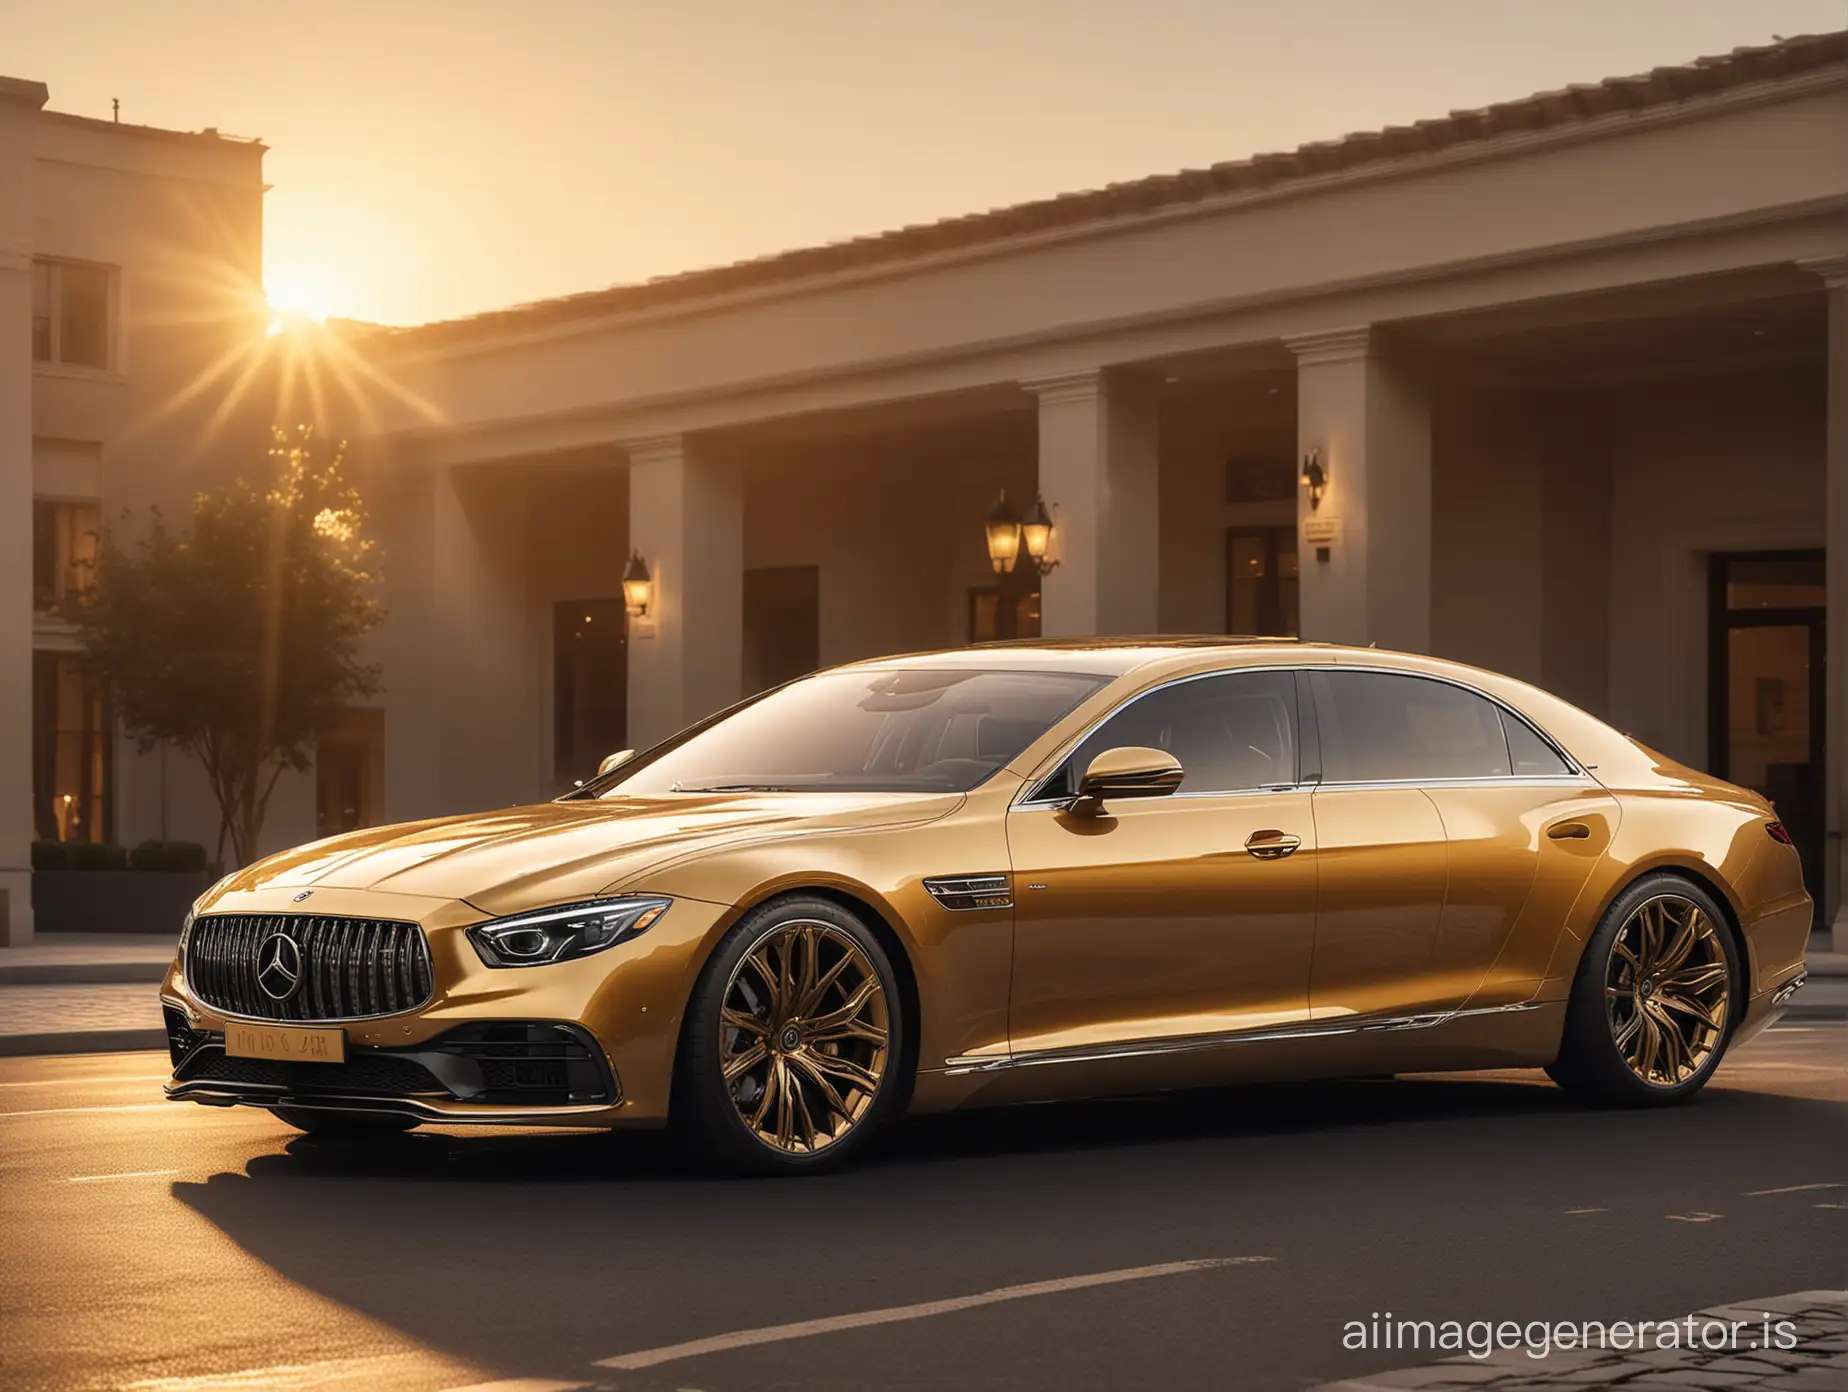 Create the ultimate executive luxury car, taking design elements from all known brands and models throughout history. Realistic photograph. golden hour.